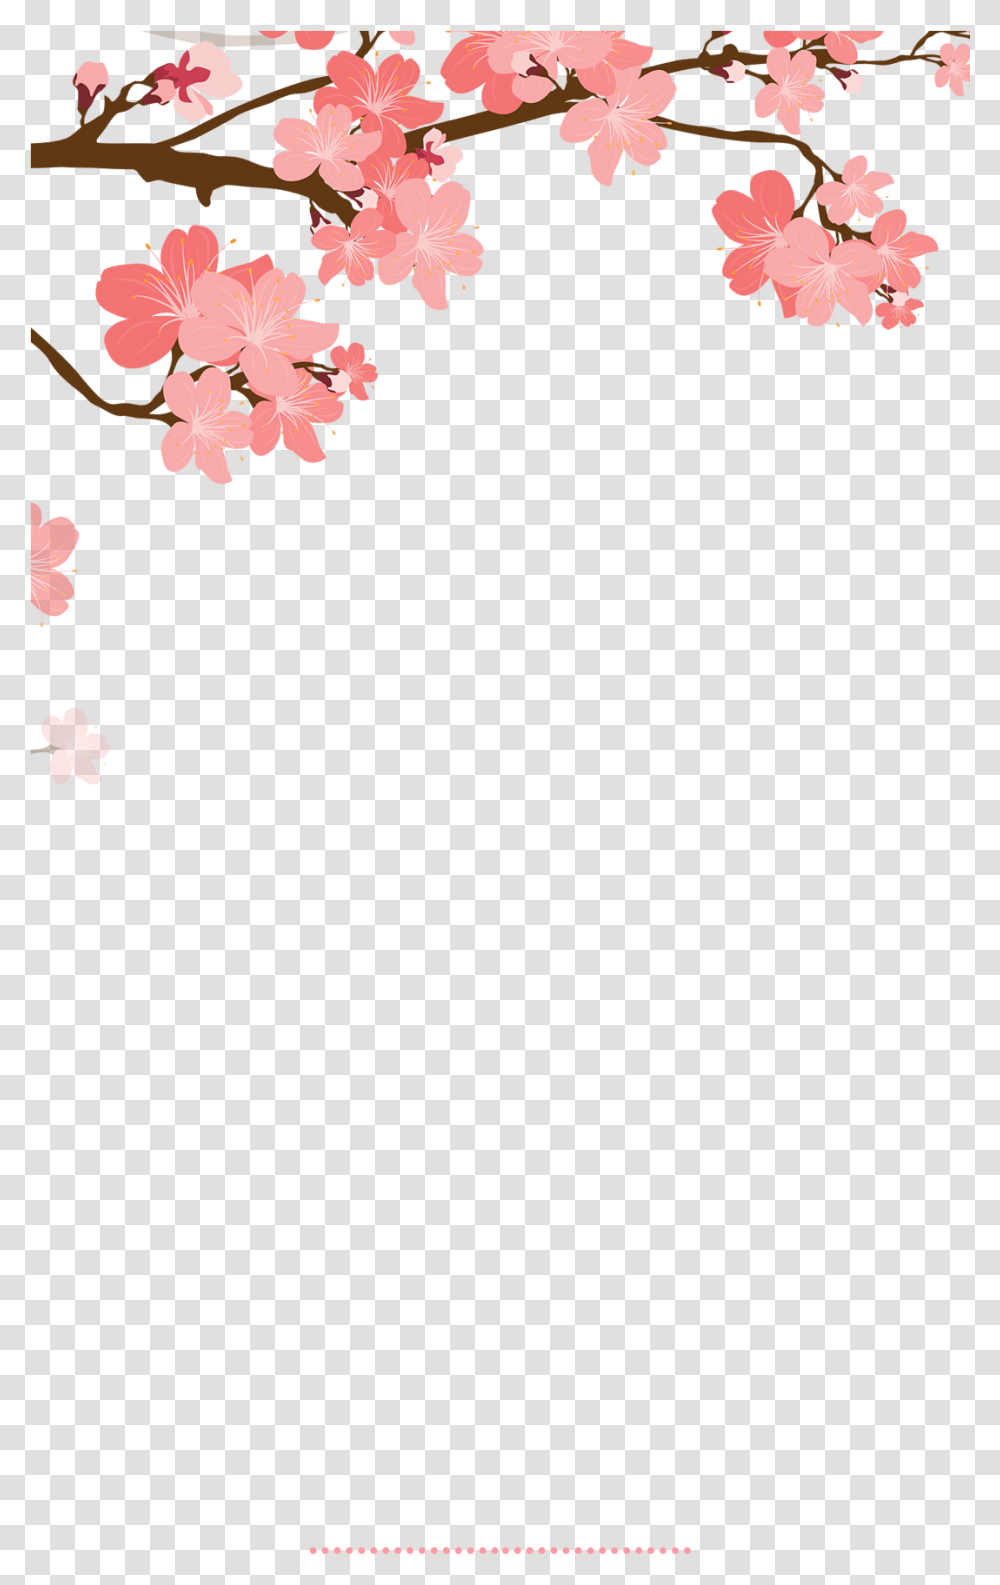 Snapchat Filters Wedding Cherry Blossom Snapchat Filter, Plant, Leaf, Tree, Flower Transparent Png